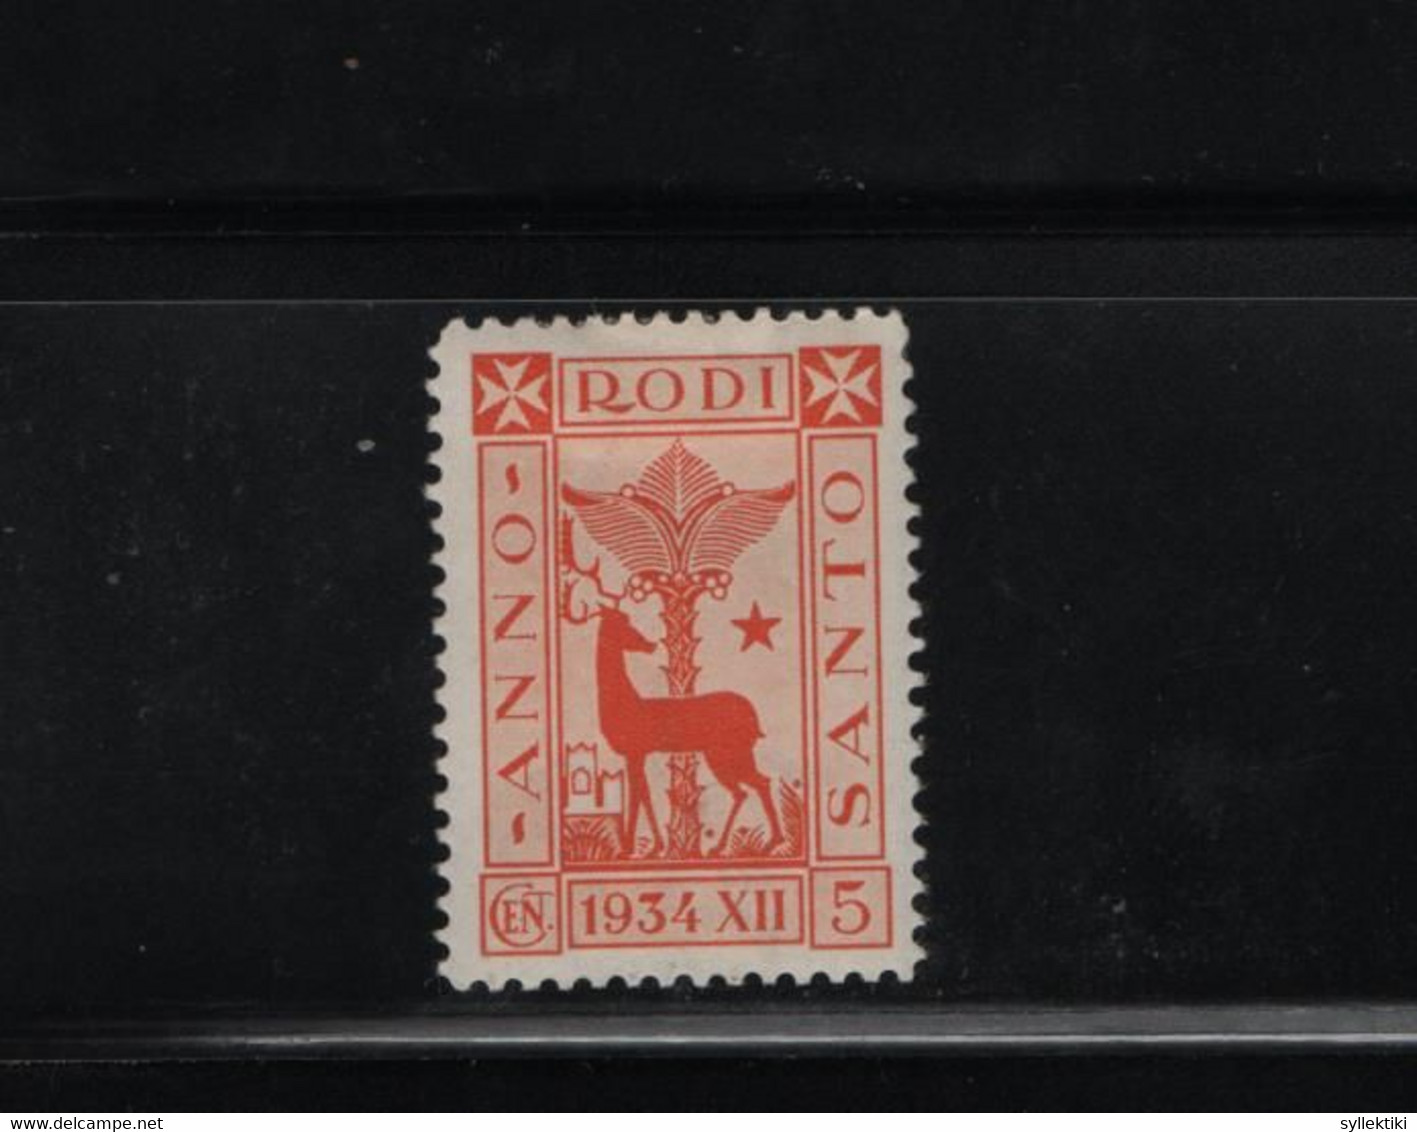 GREECE DODECANESE 1935 HOLY YEAR ISSUE 5 CENT MH STAMP    HELLAS No 144 AND VALUE EURO 25.00 - Dodecaneso